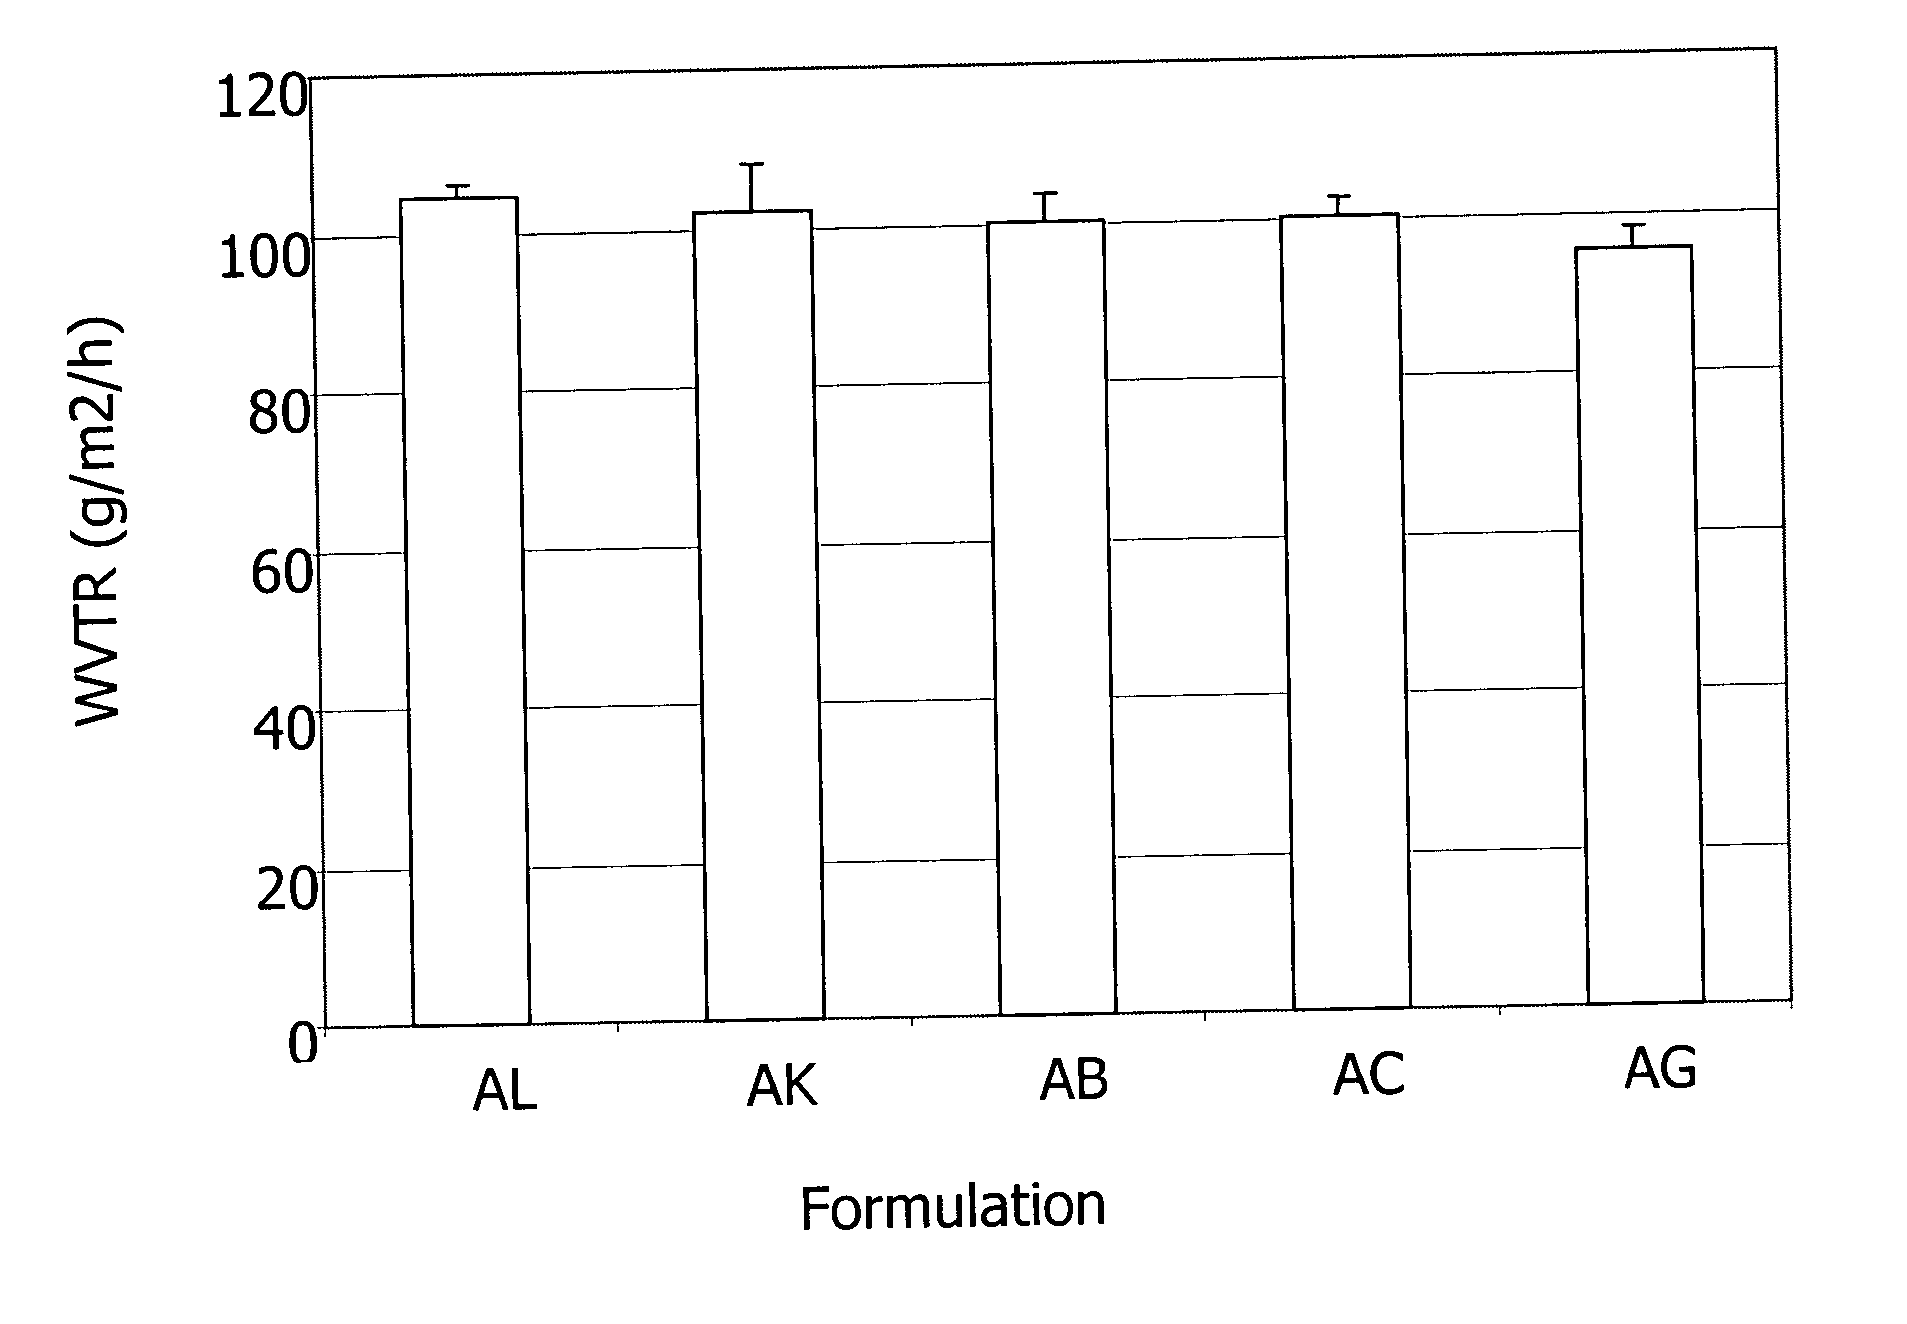 Tissue products comprising a moisturizing and lubricating composition